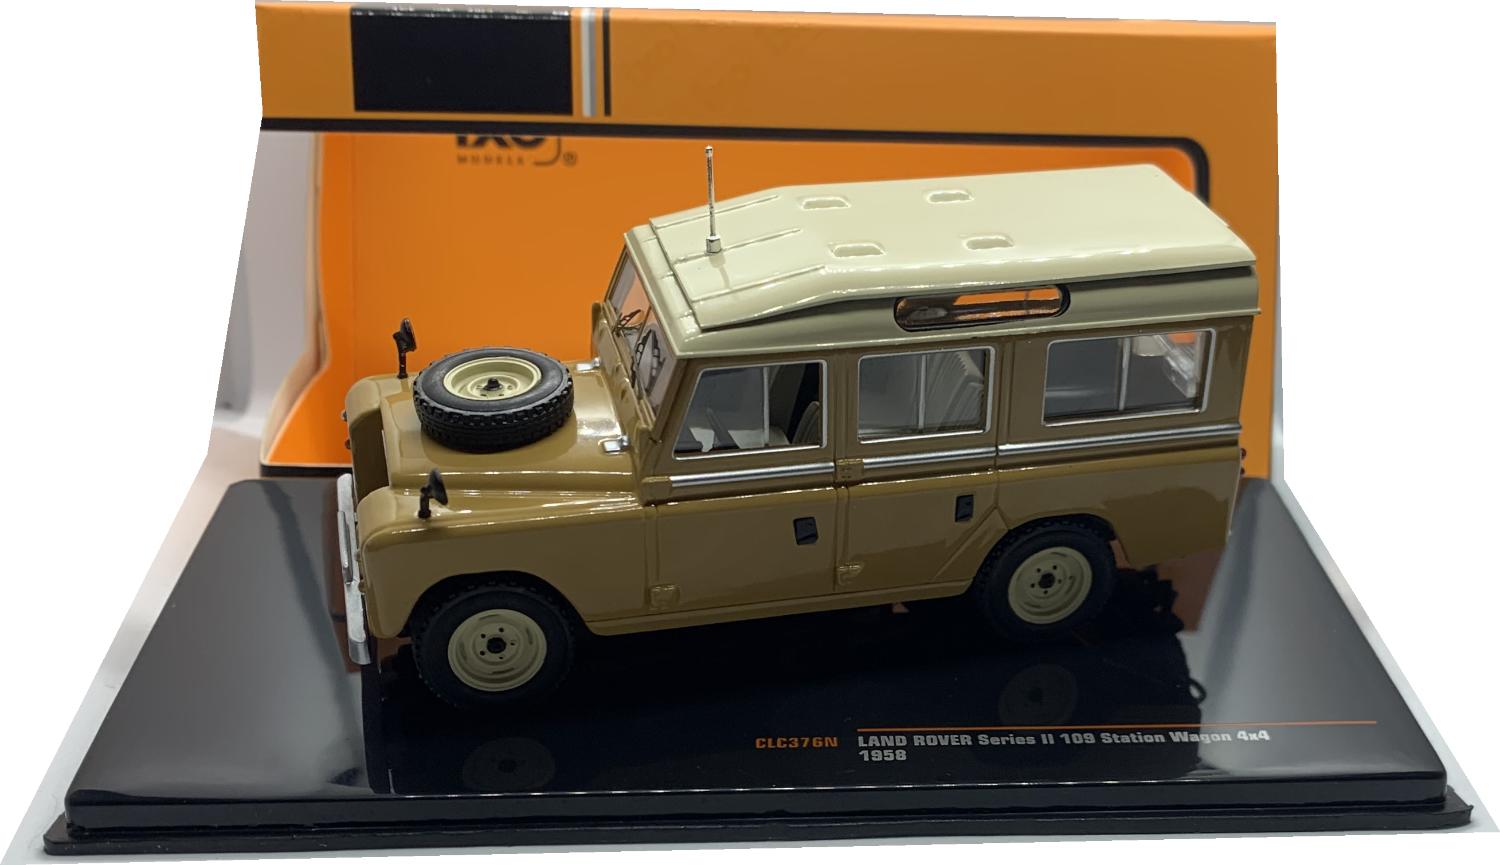 Land Rover Series ate Series 2A/3 109 Station Wagon 4x4 1958 in beige 1:43 scale model from IXO